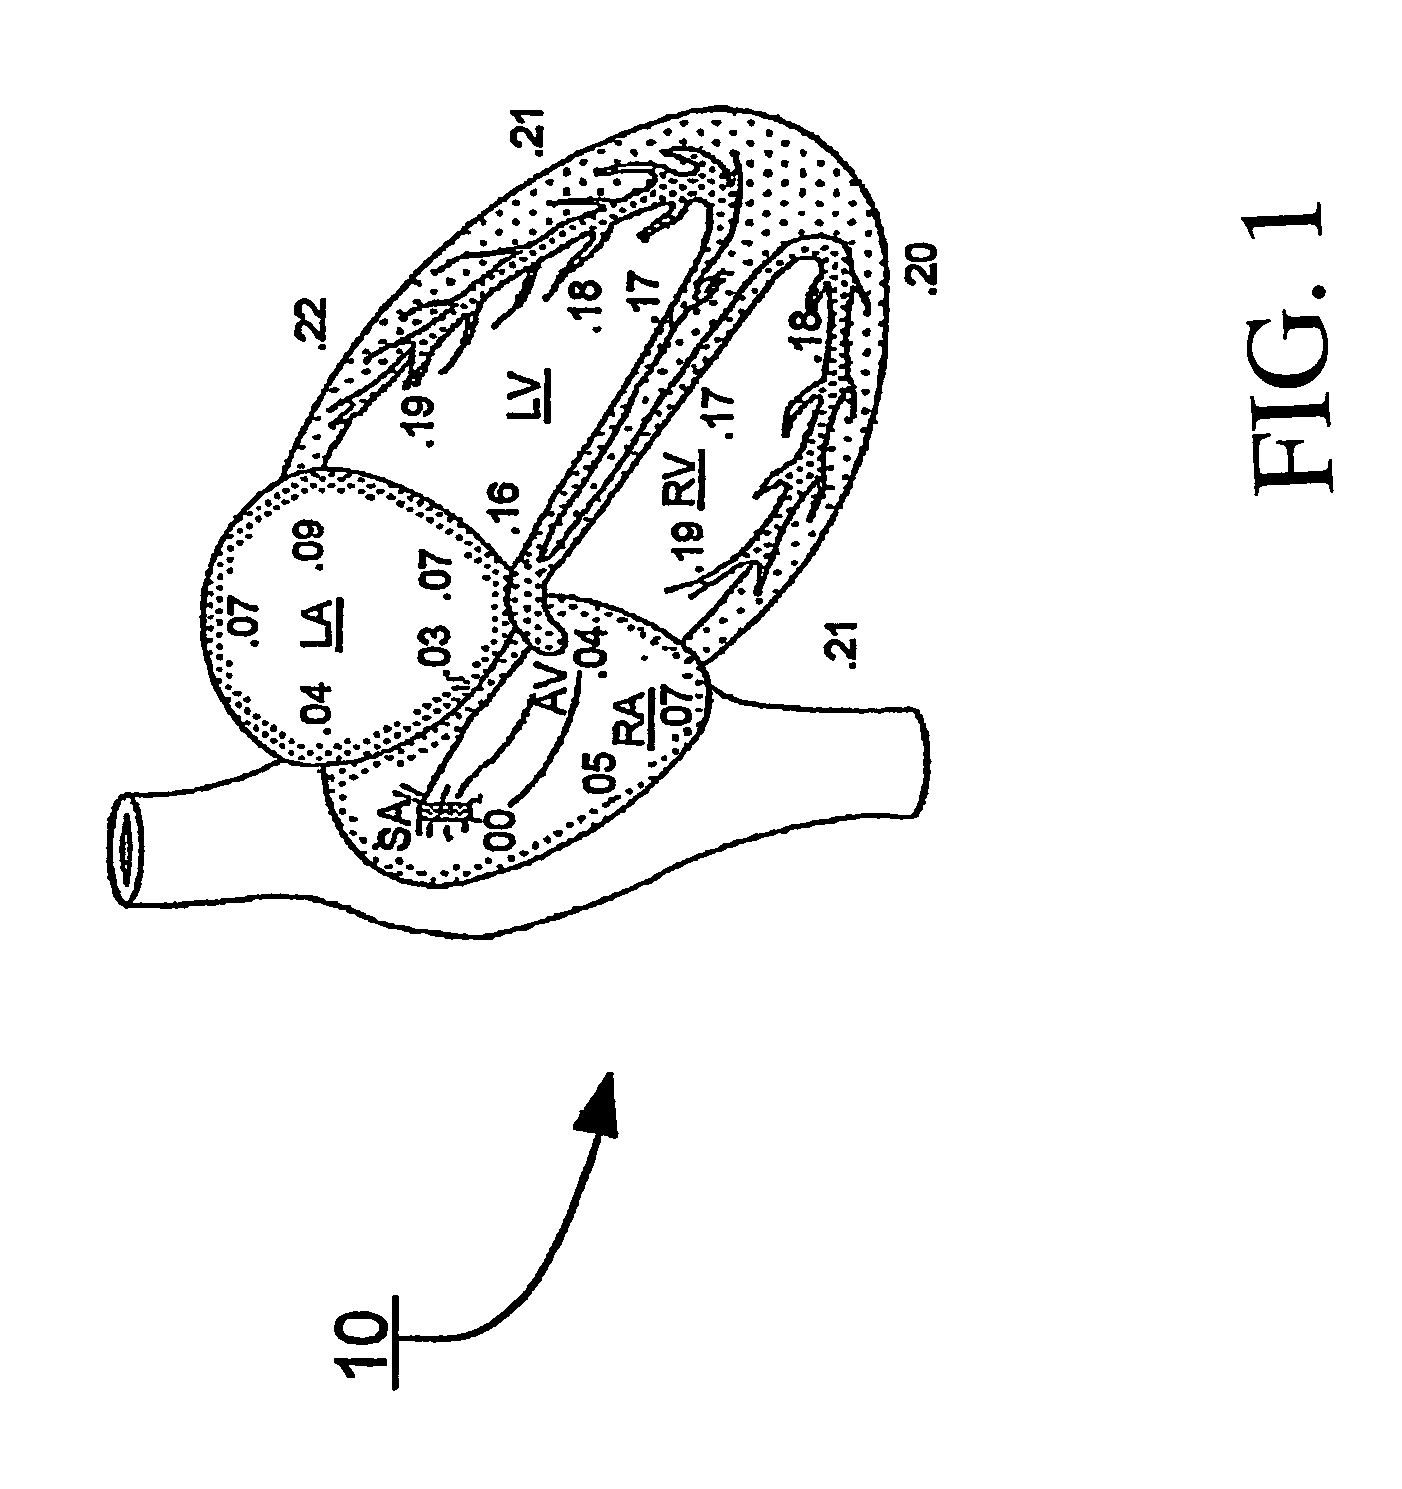 Apparatus and methods of energy efficient, atrial-based Bi-ventricular fusion-pacing